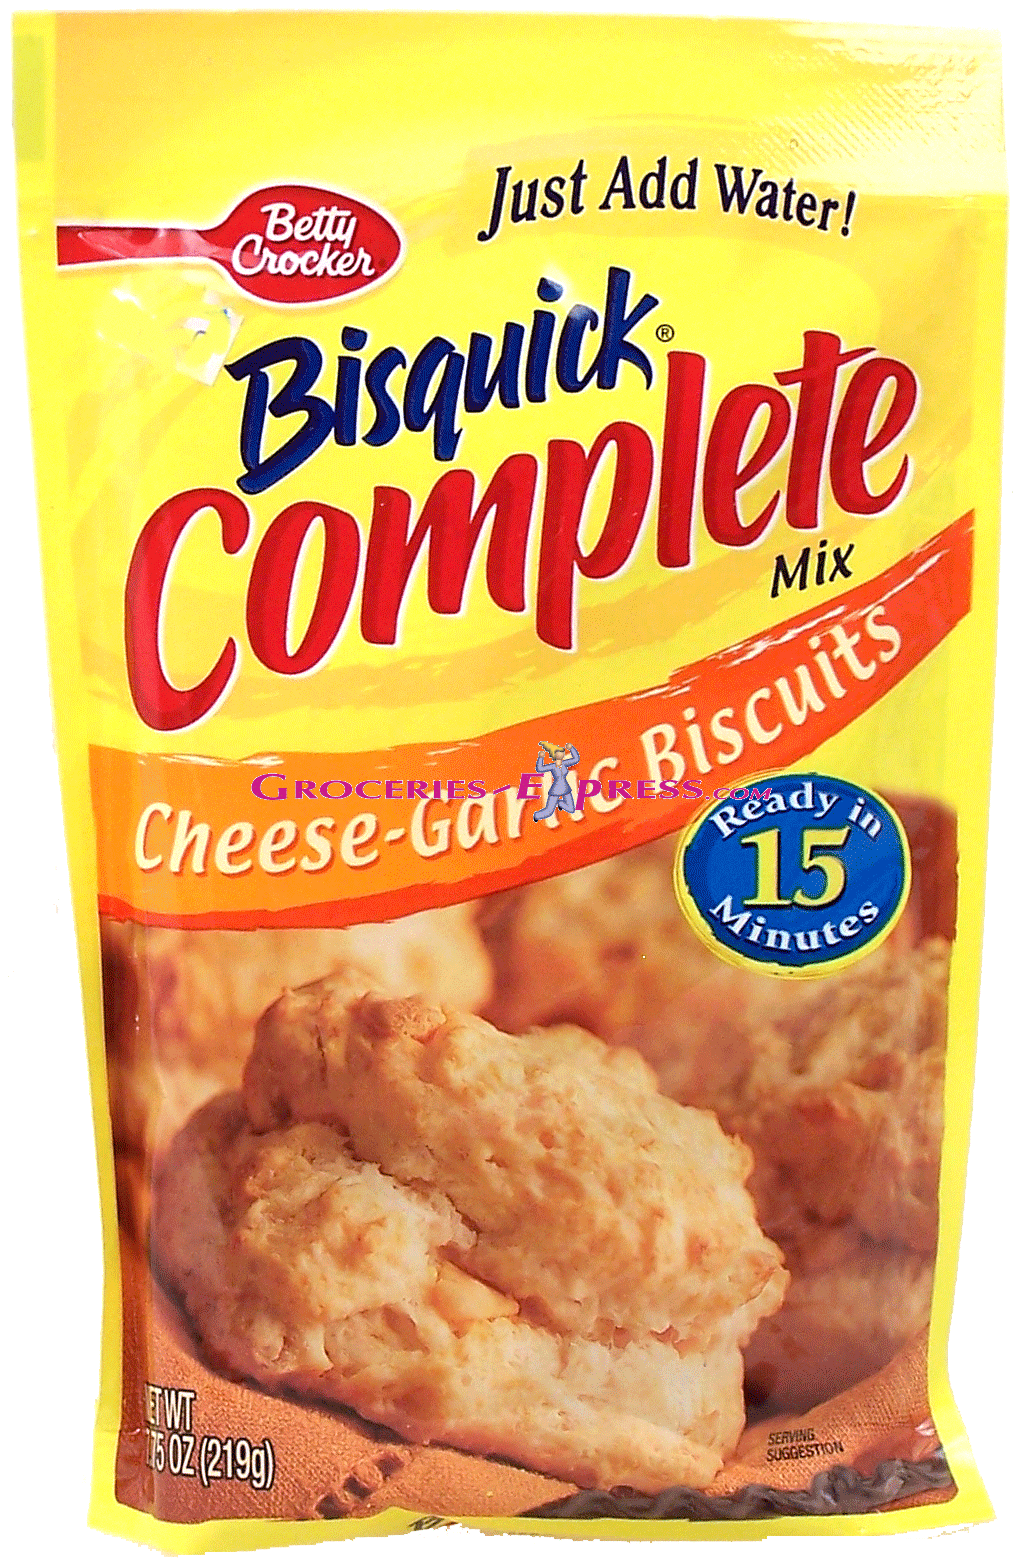 Bisquick Complete Biscuit Mix cheese garlic biscuits mix Full-Size Picture